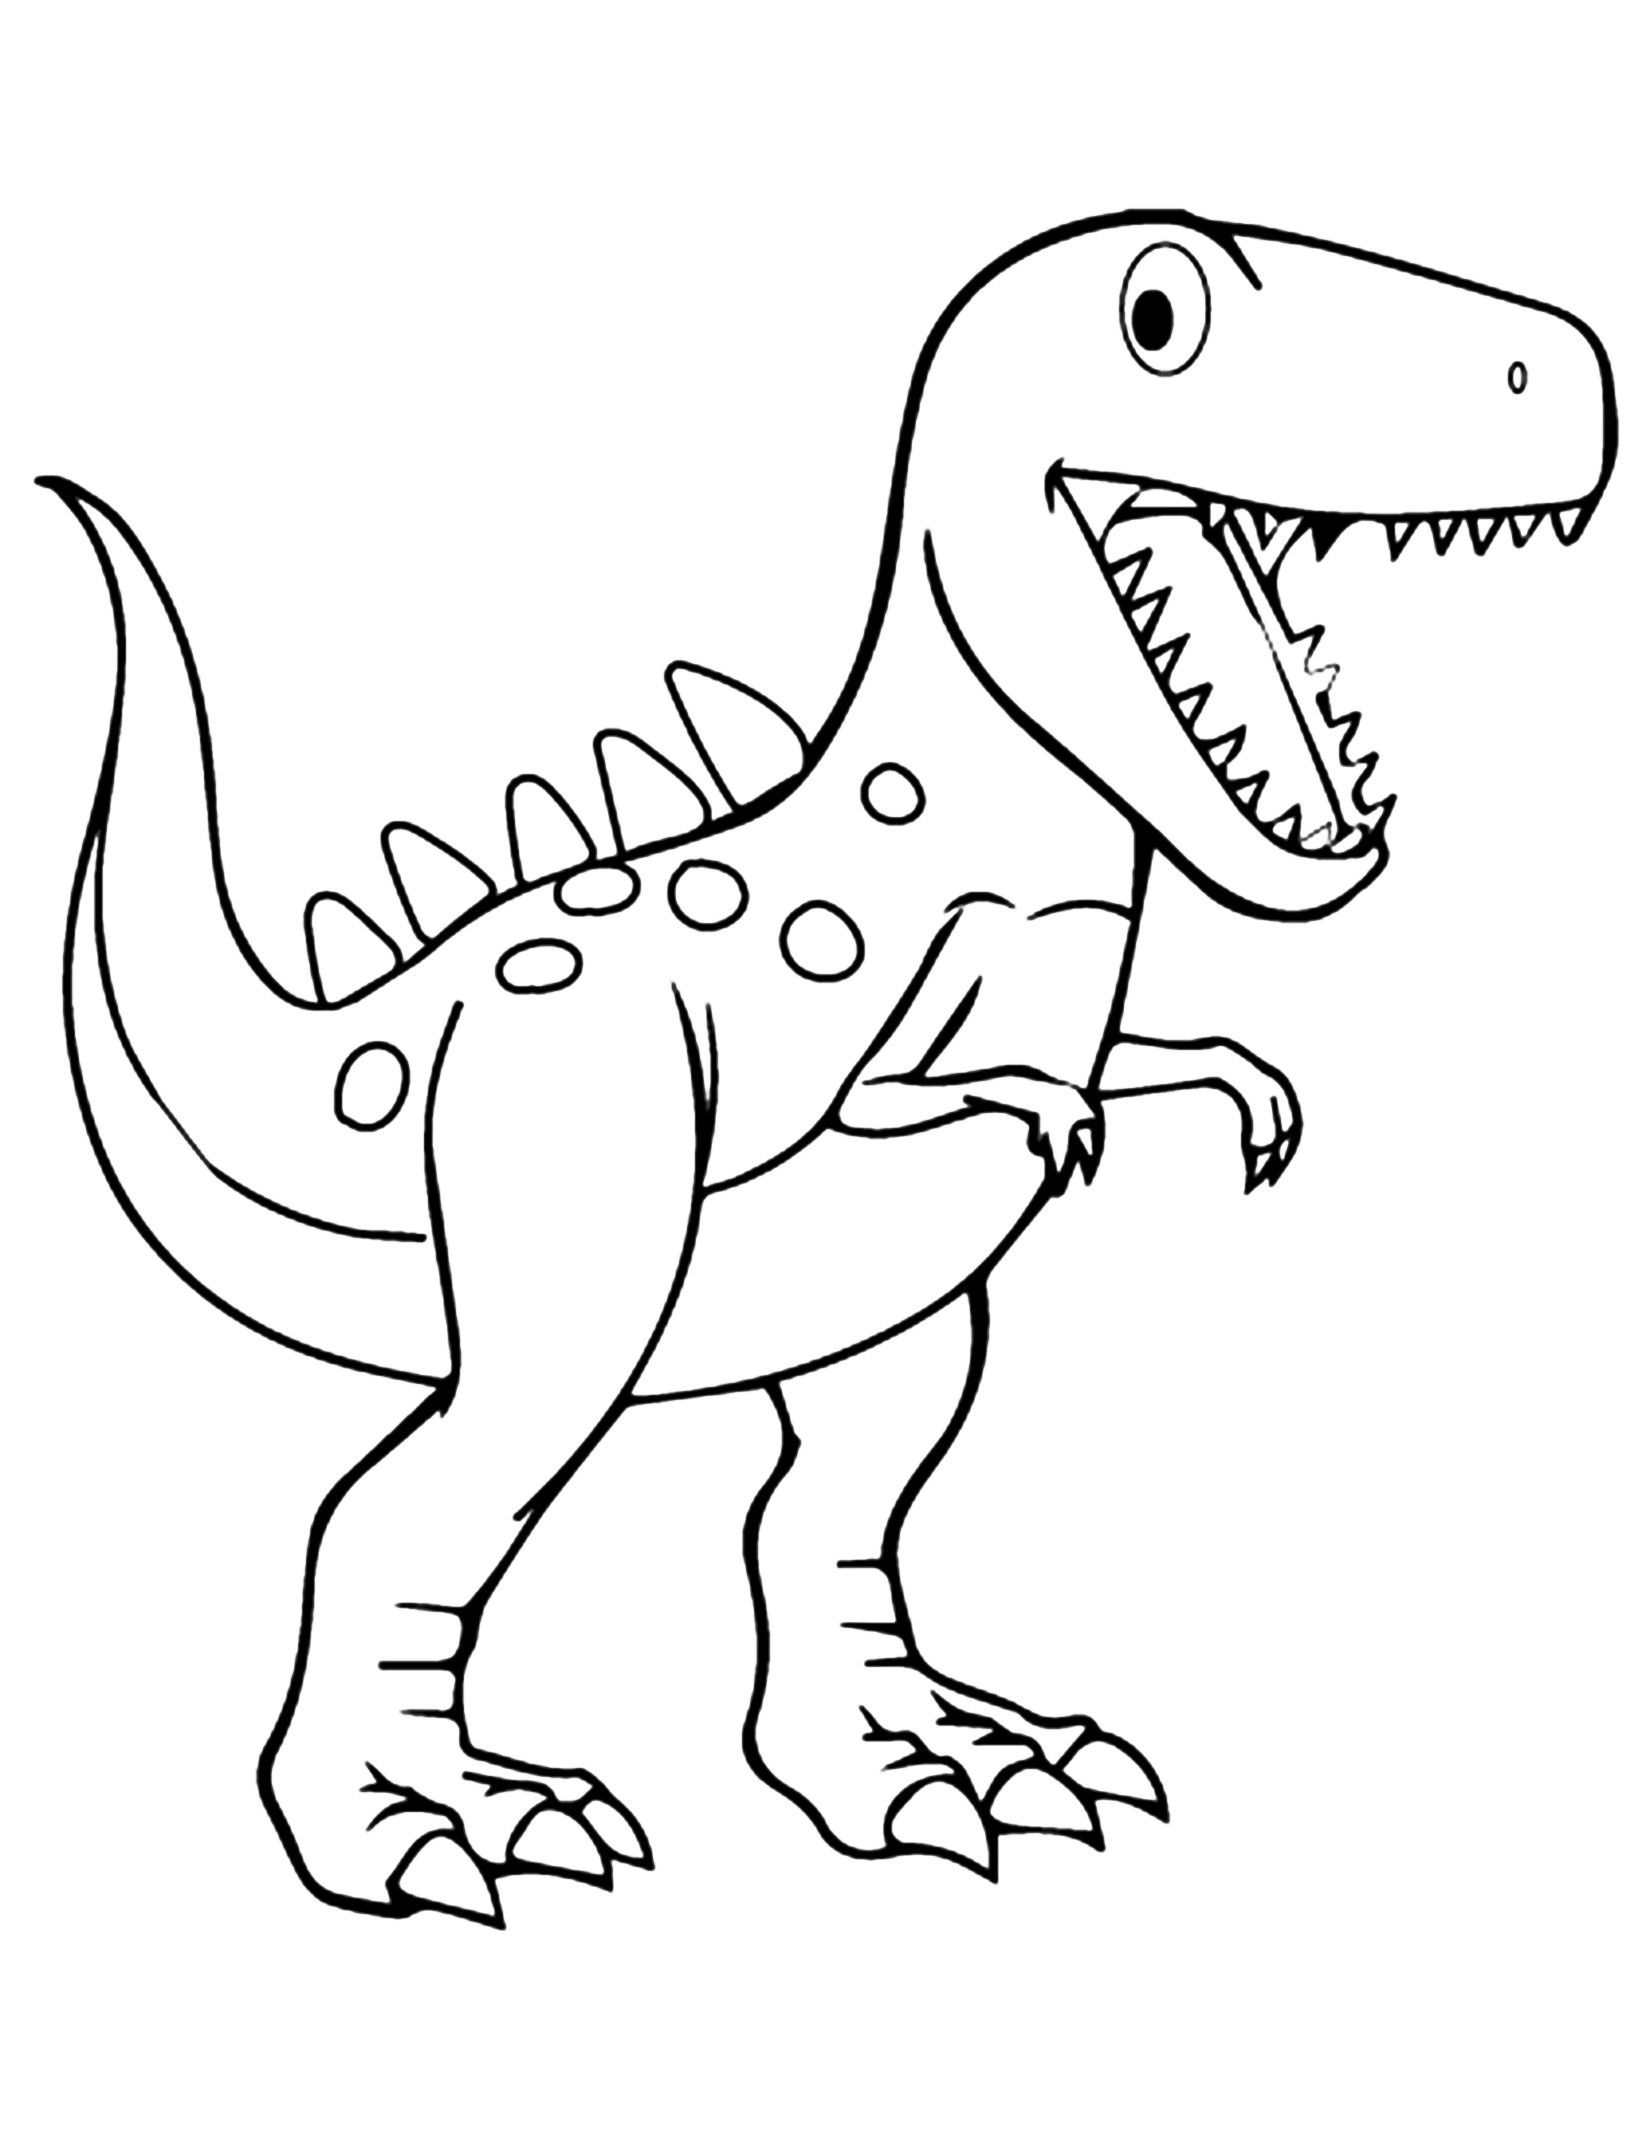 100+ Dinosaur Coloring Pages For Kids